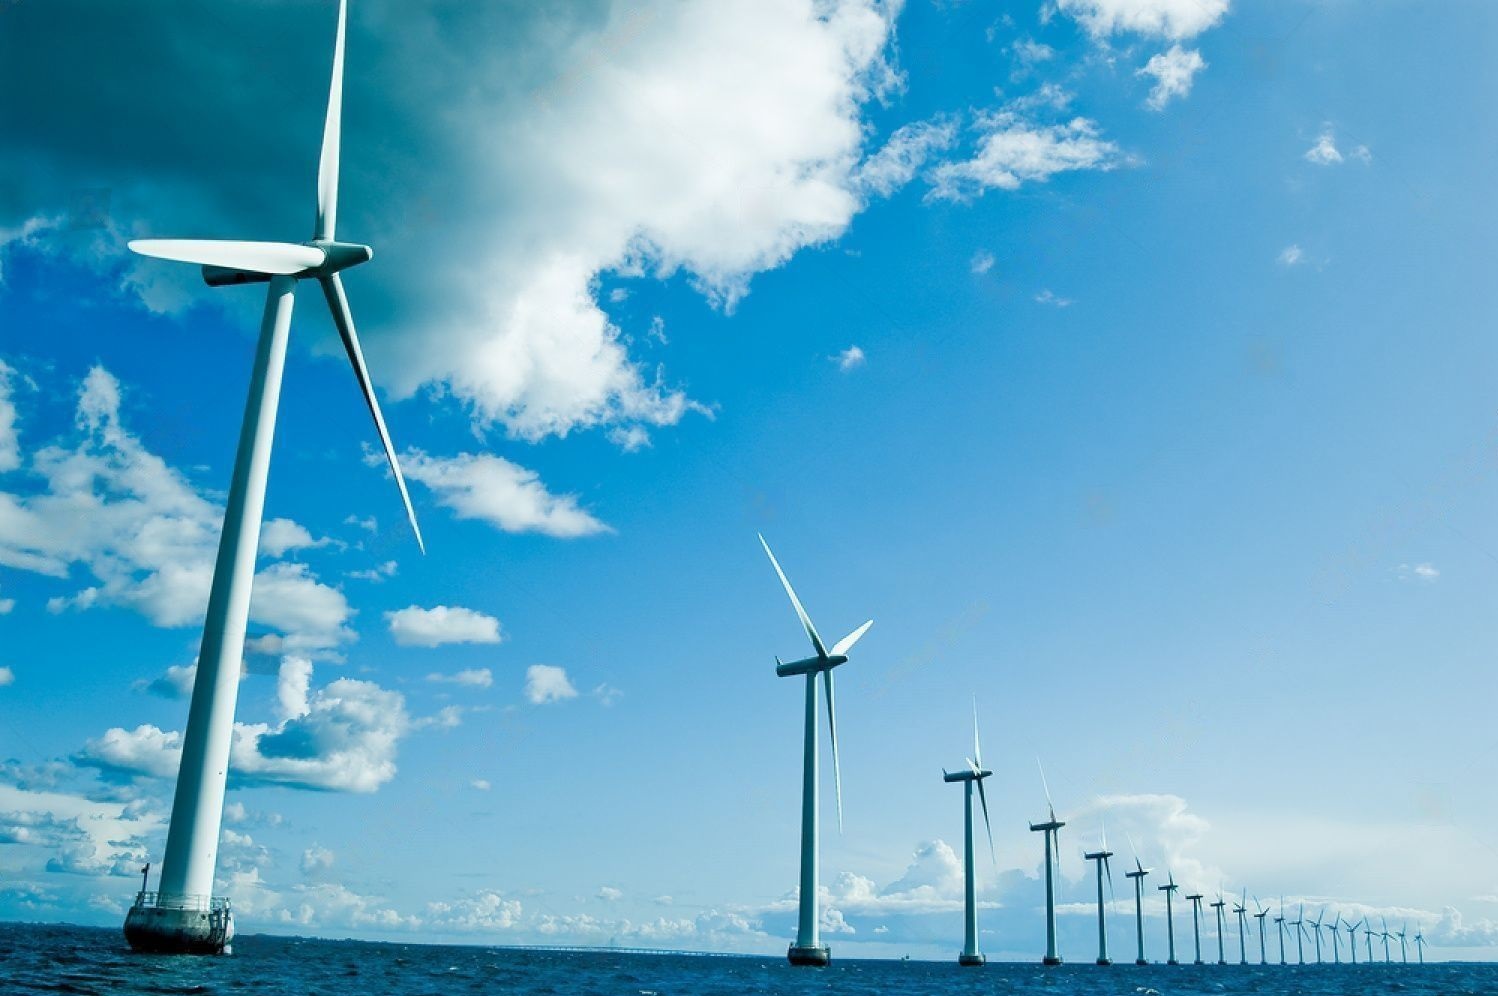 Offshore wind farm/park A More Popular Option Than Land-Based One